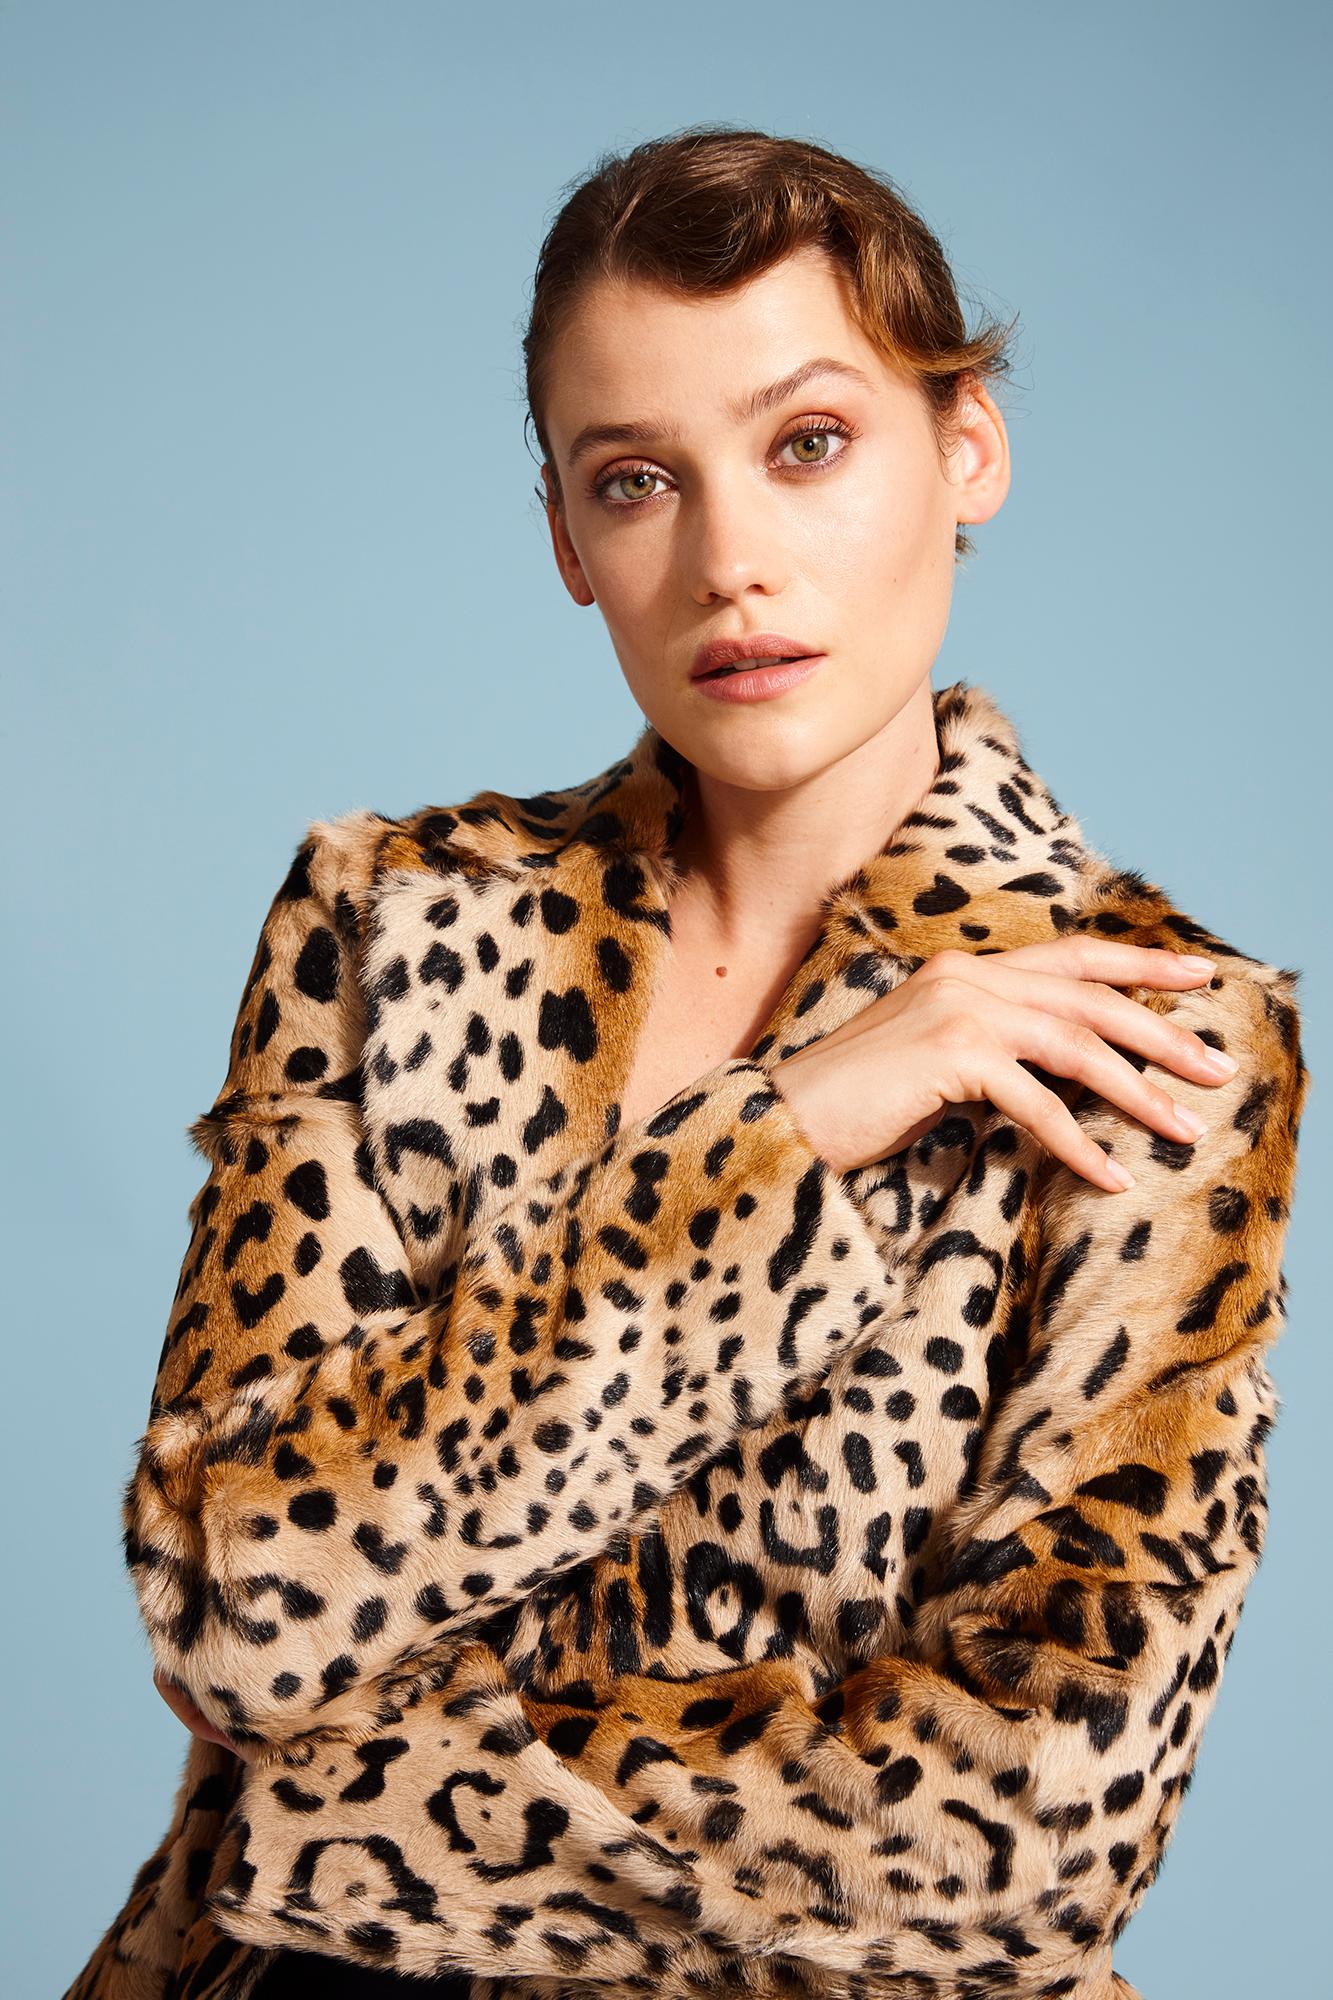 This Leopard print coat is Verheyen London’s classic staple for effortless style and glamour.
A coat for dressing up and down with jeans or a dress.

PRODUCT DETAILS

High Collar Leopard Print Coat

Size: UK 12
Colour: Natural

Dyed Printed Goat